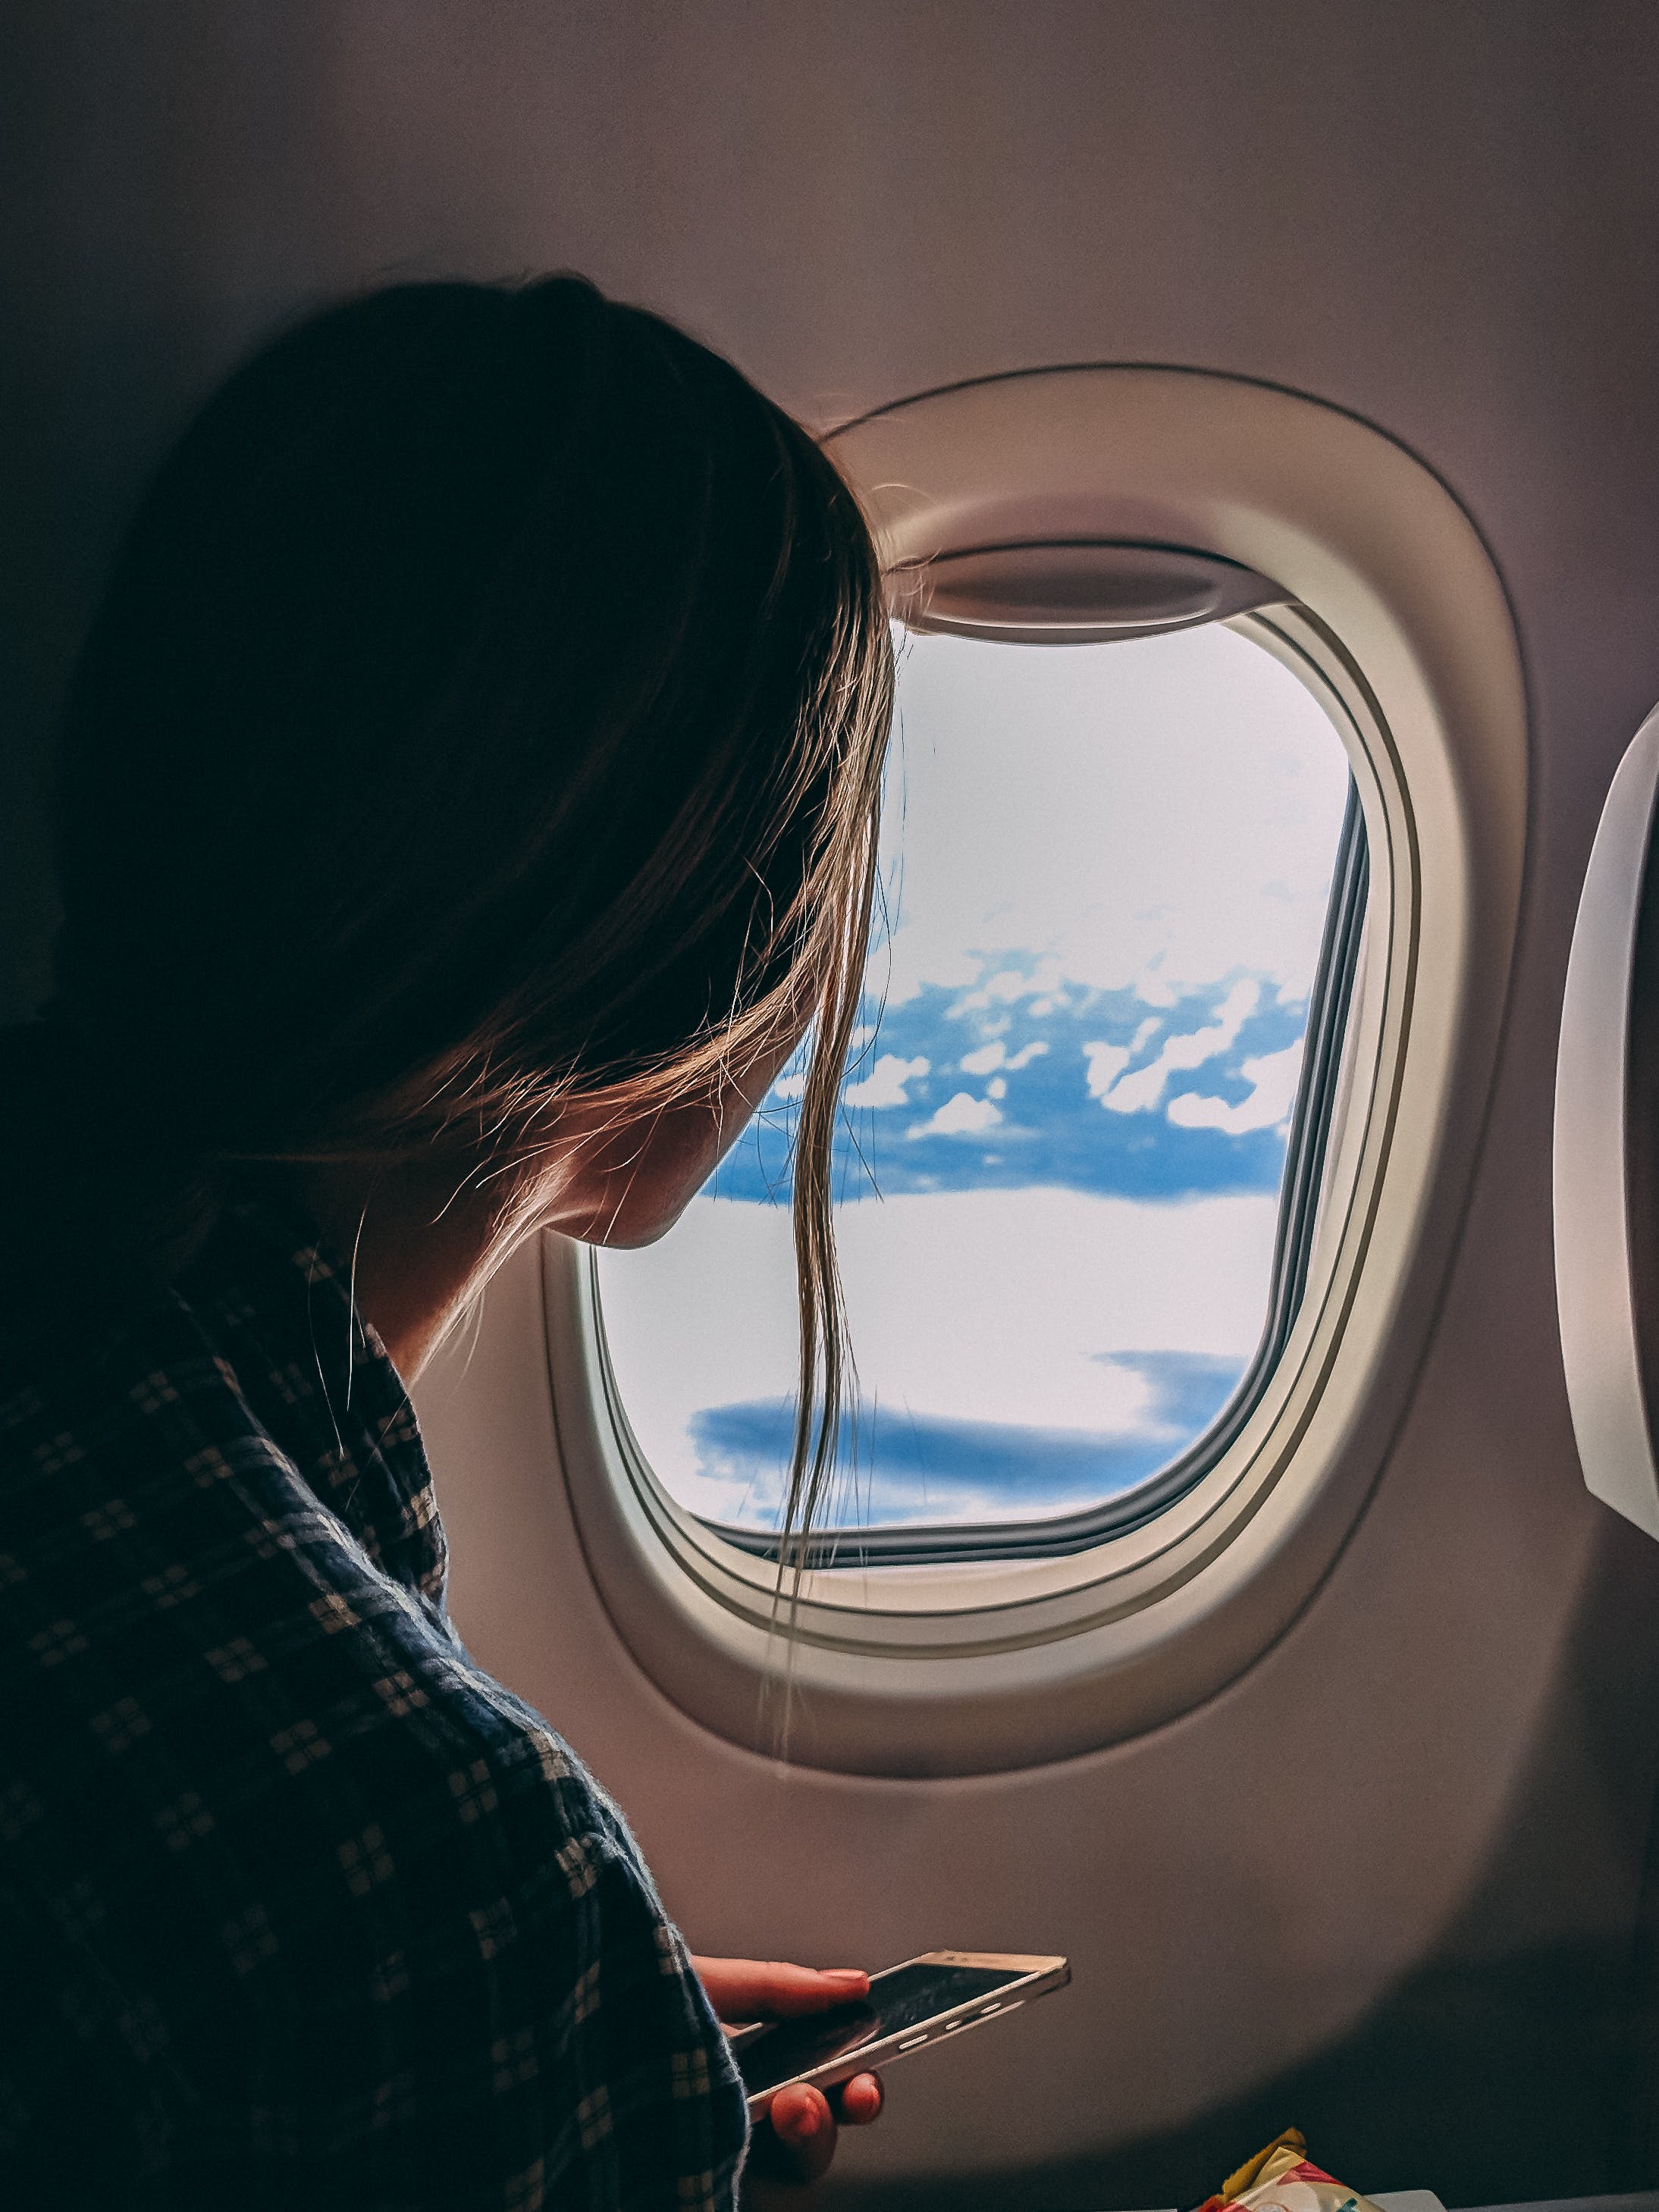 A woman passenger looking out the window | Source: Pexels